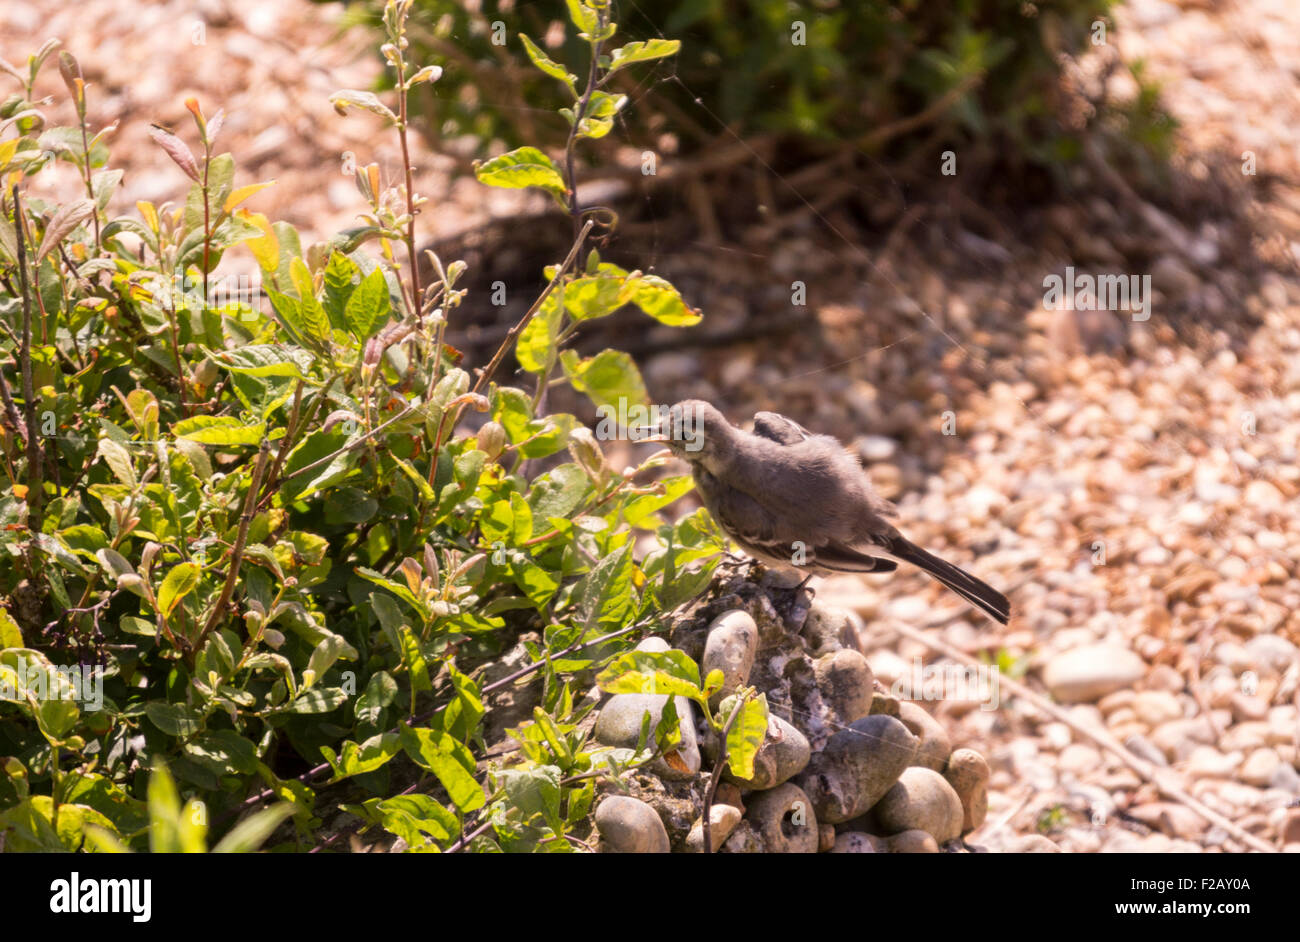 Juvenile pied wagtail in vegetation Stock Photo